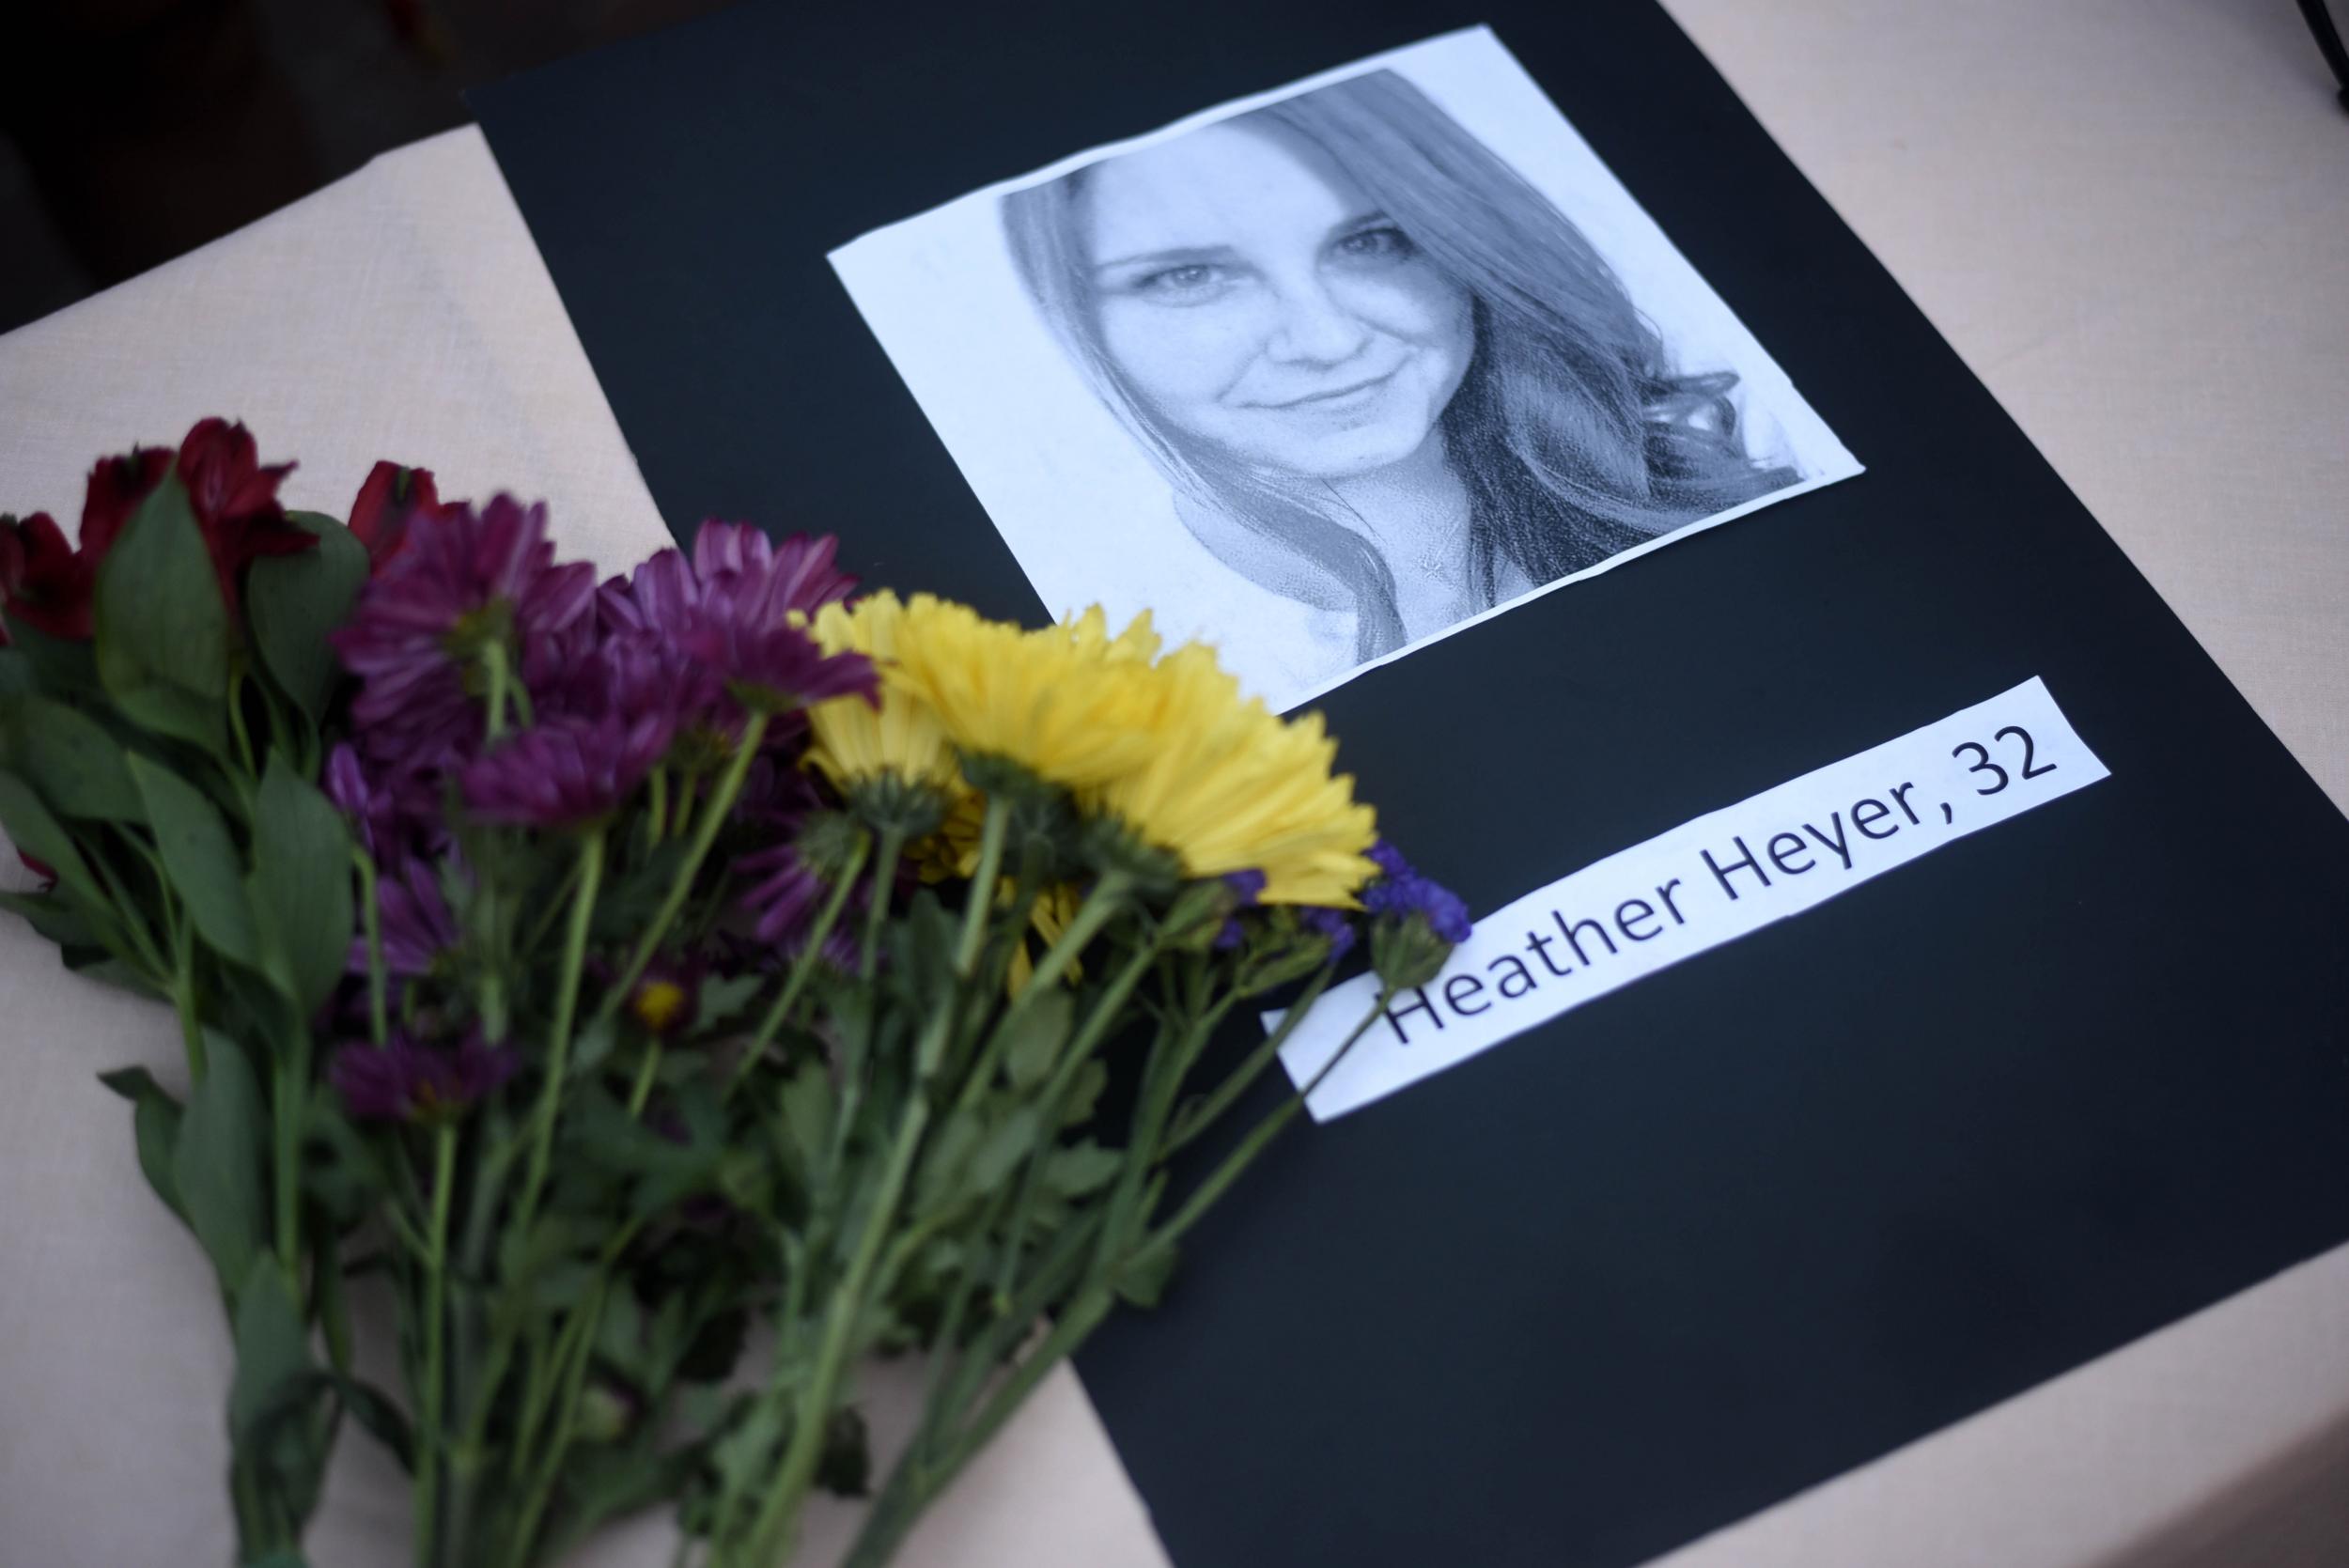 A makeshift memorial to honour Heyer after she died in Charlottesville